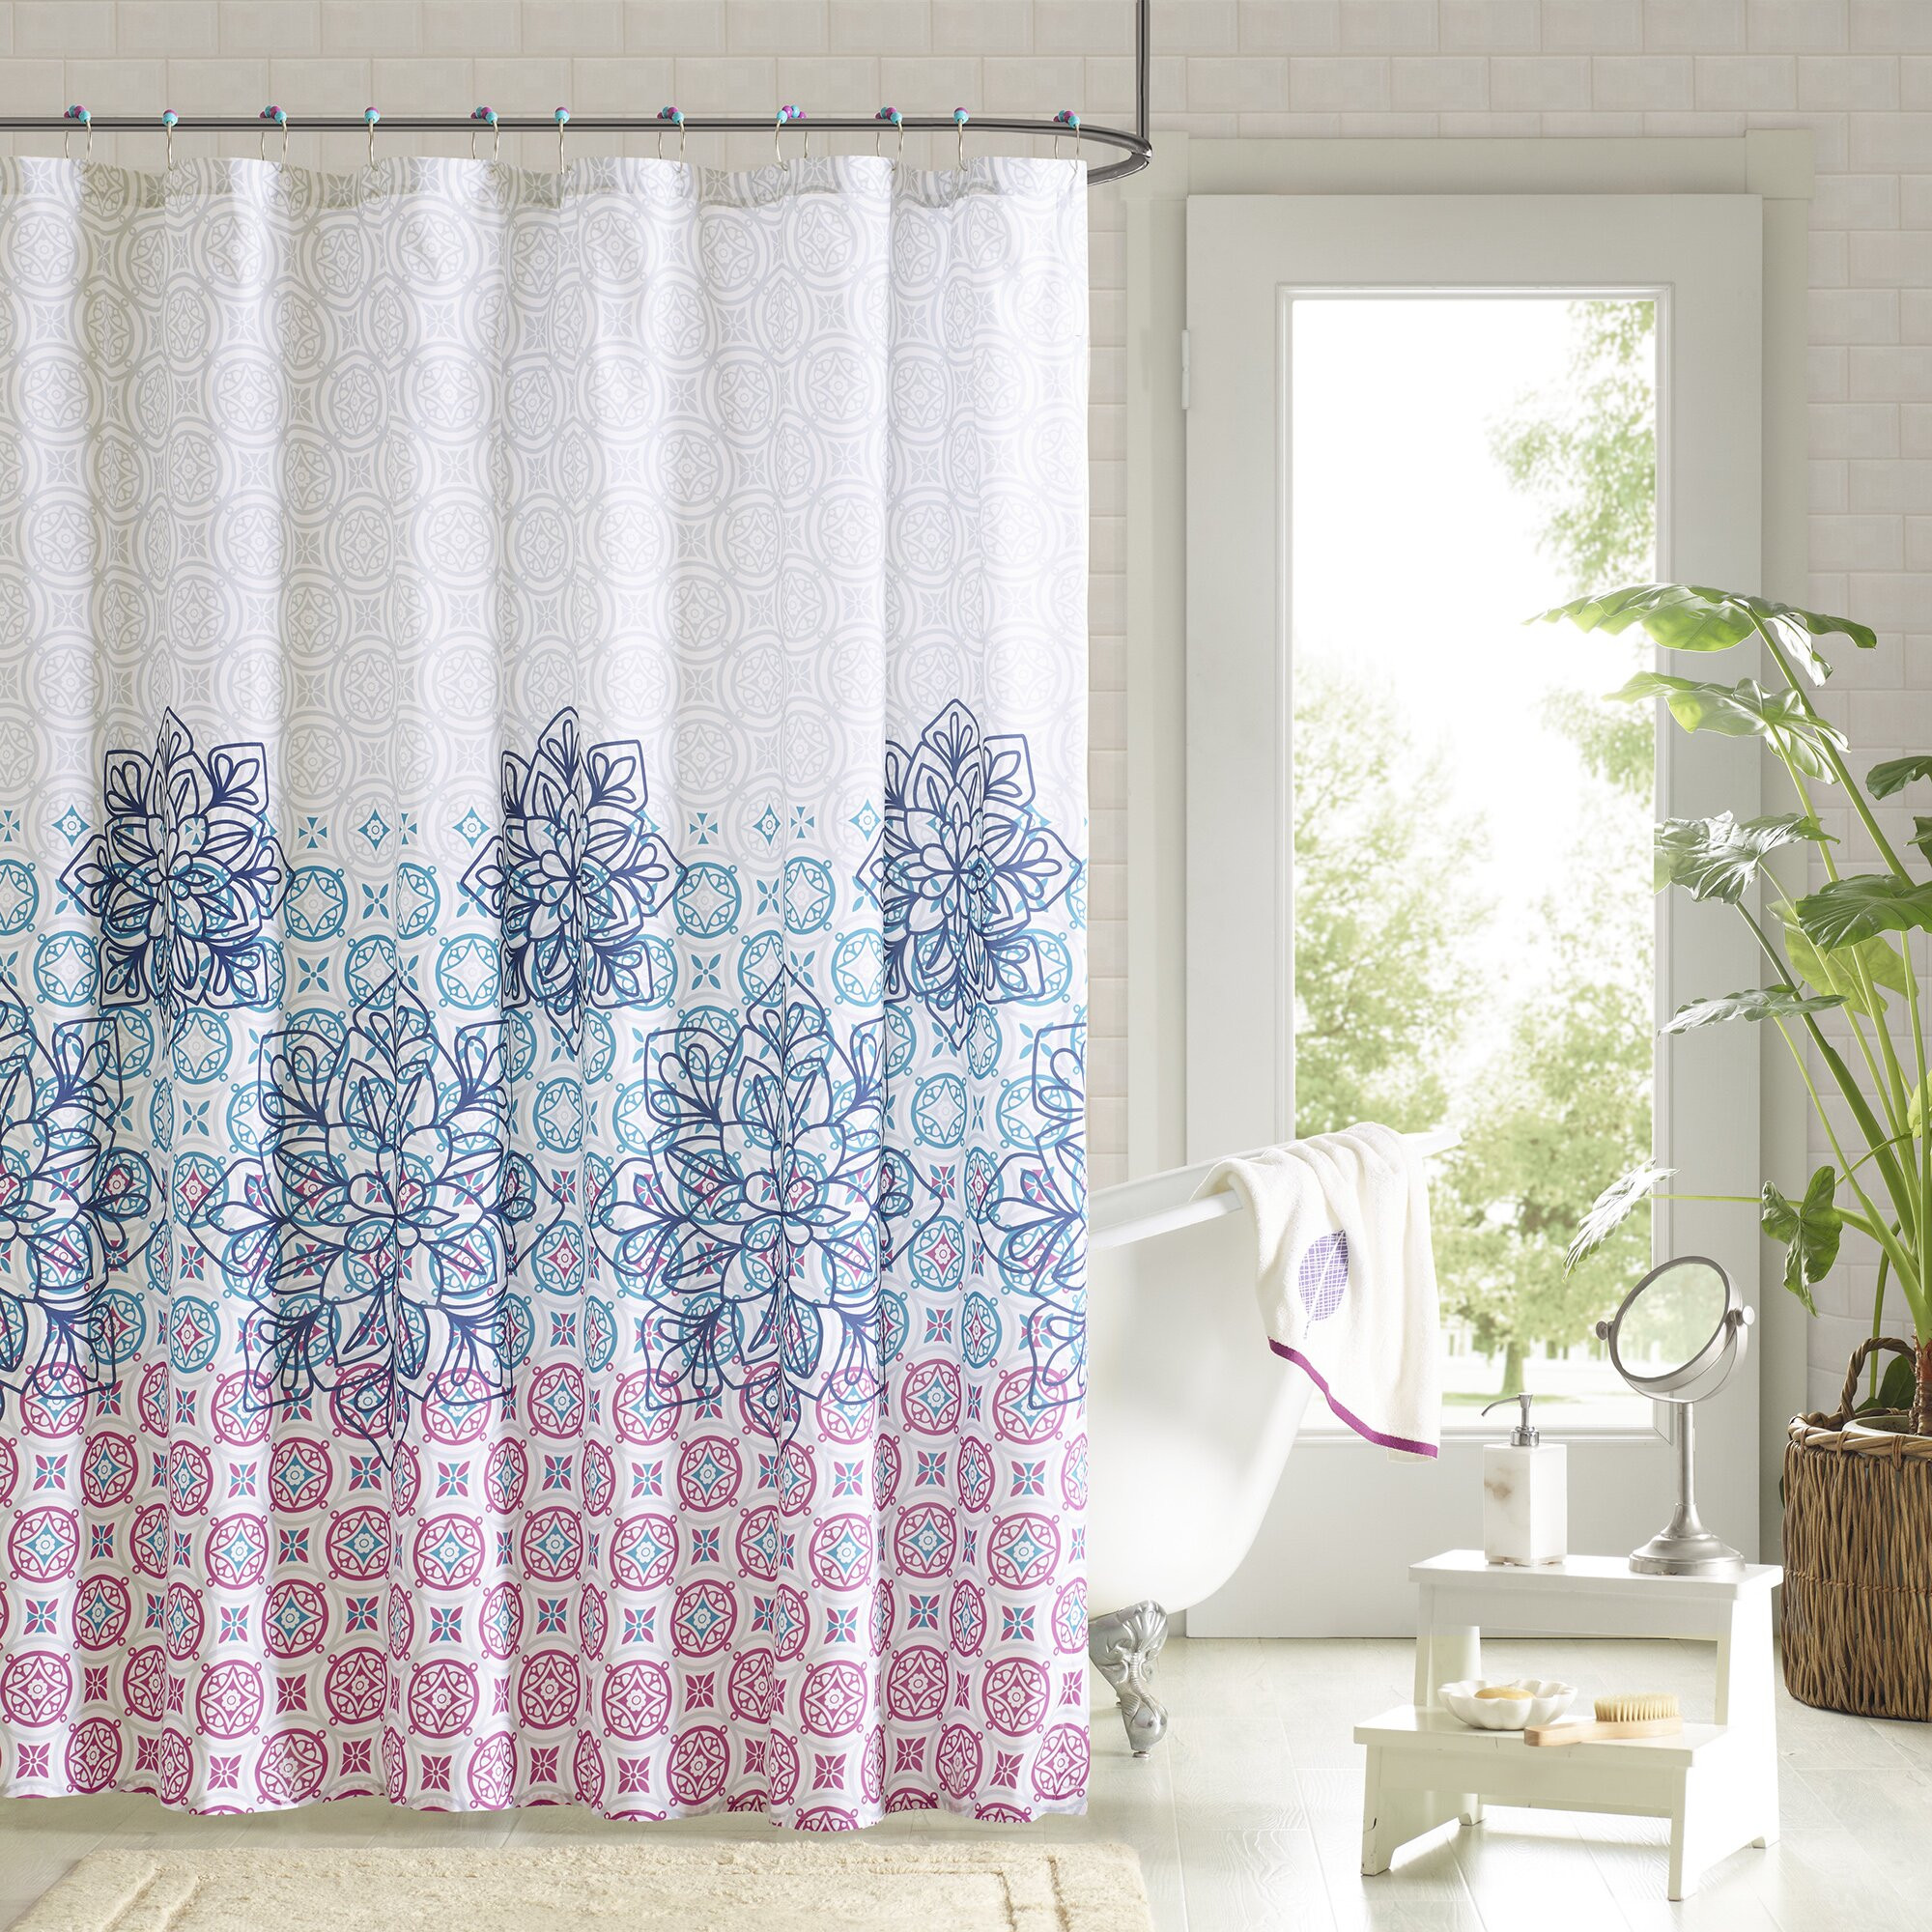 Bathroom Sets With Shower Curtain
 90° by Design Lab Jessica 14 Piece Shower Curtain Set